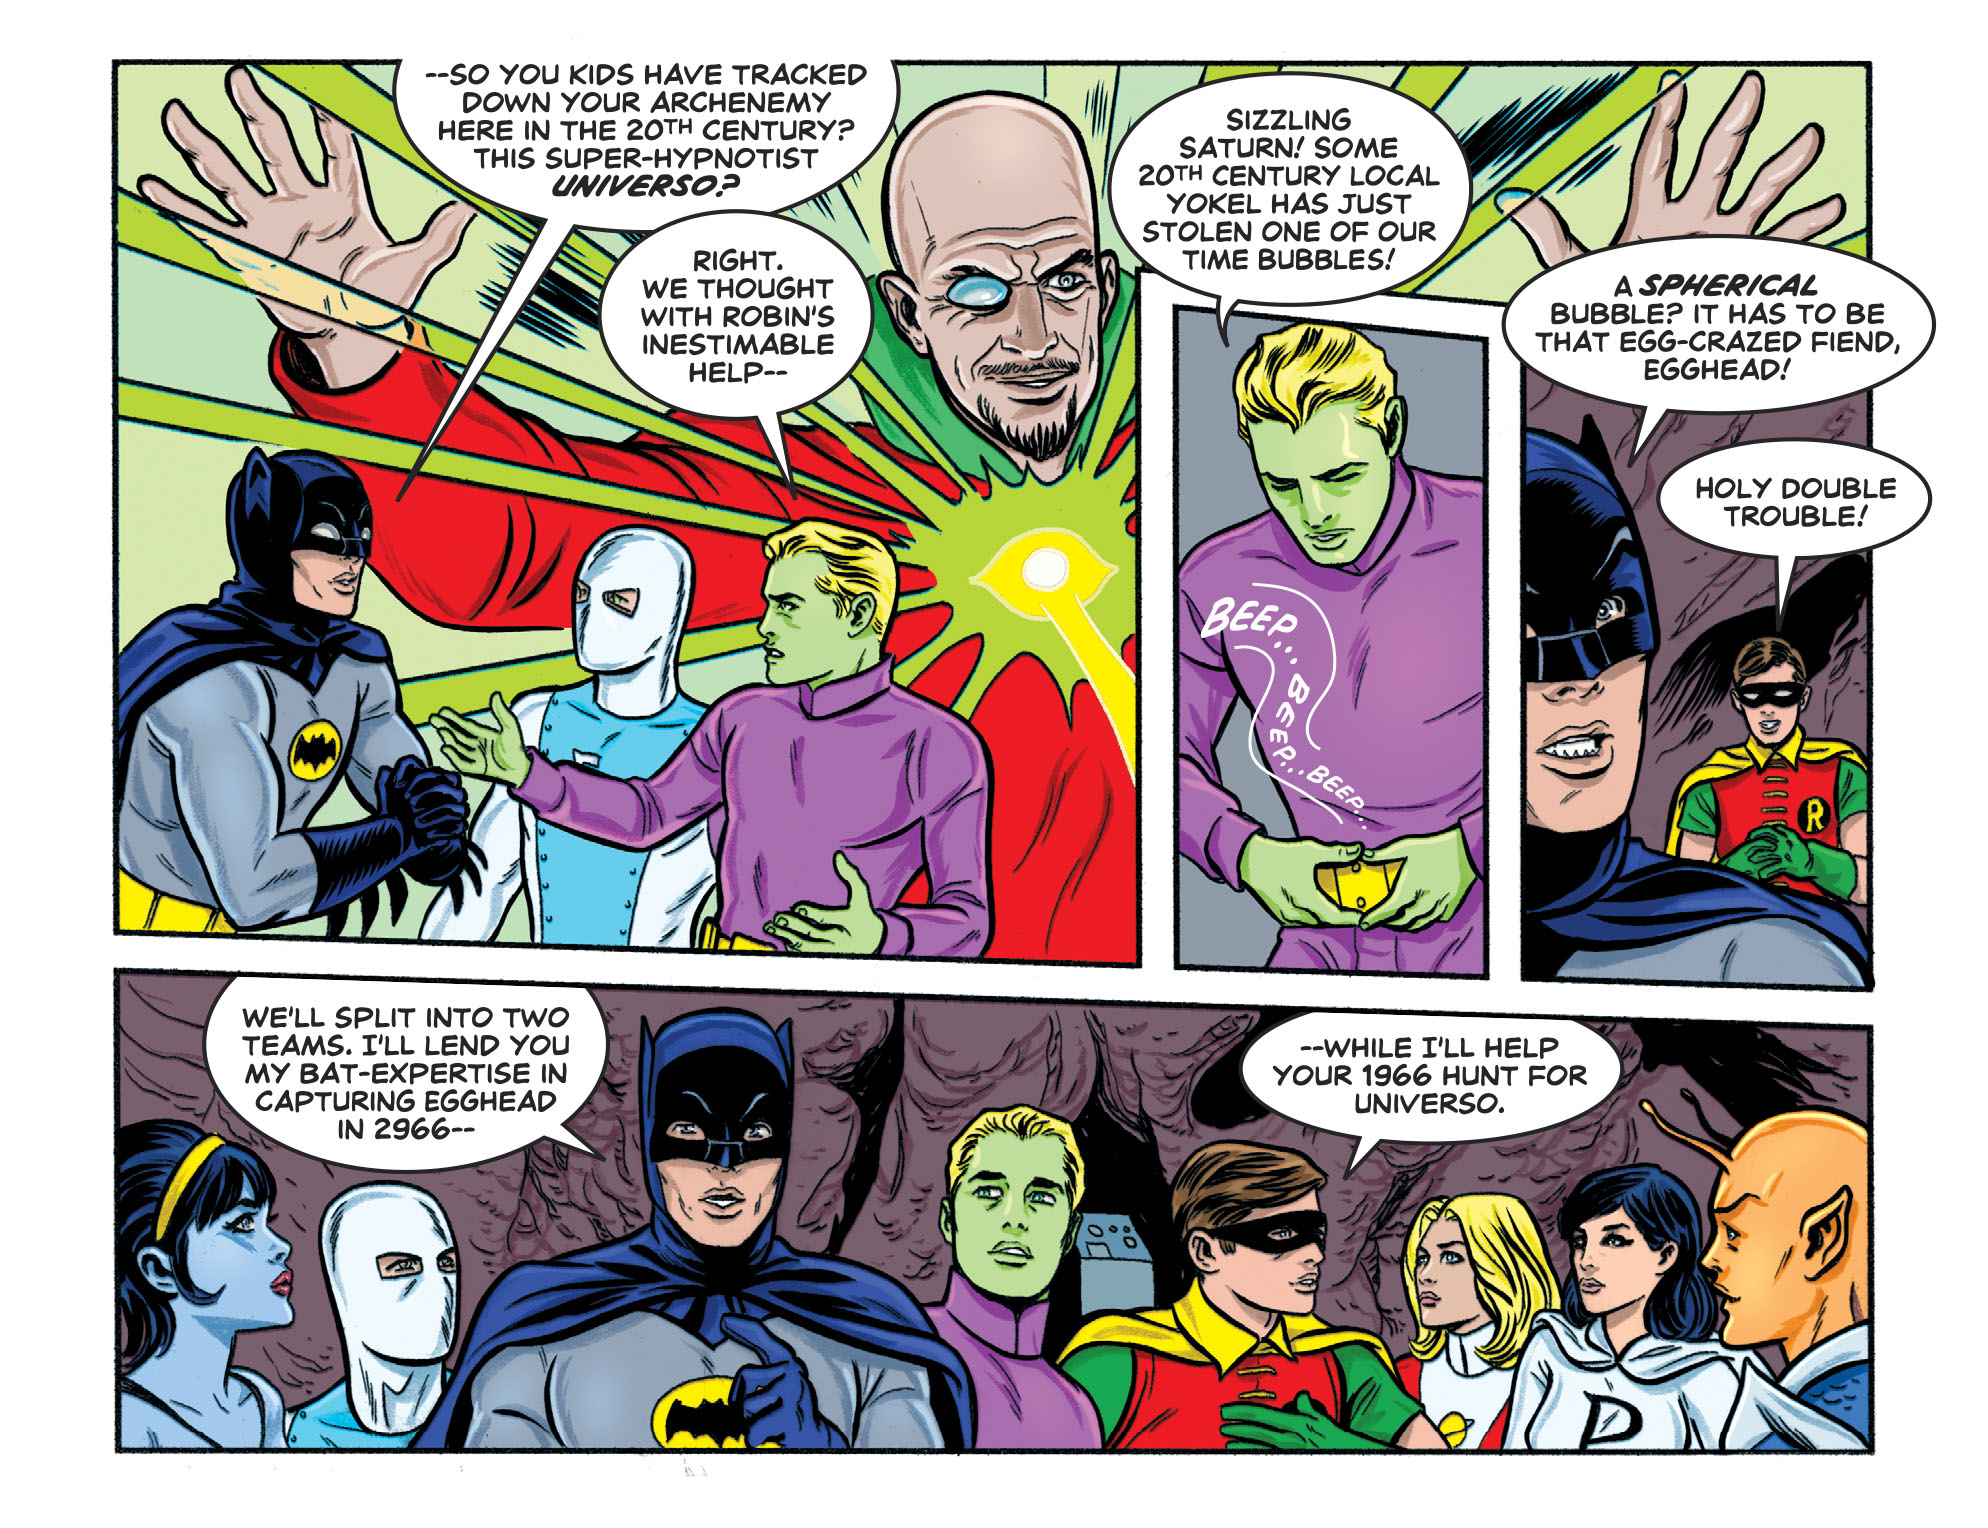 Batman ’66 Met The Legion Of Super-Heroes and They Cramped Each Other’s Style So Bad